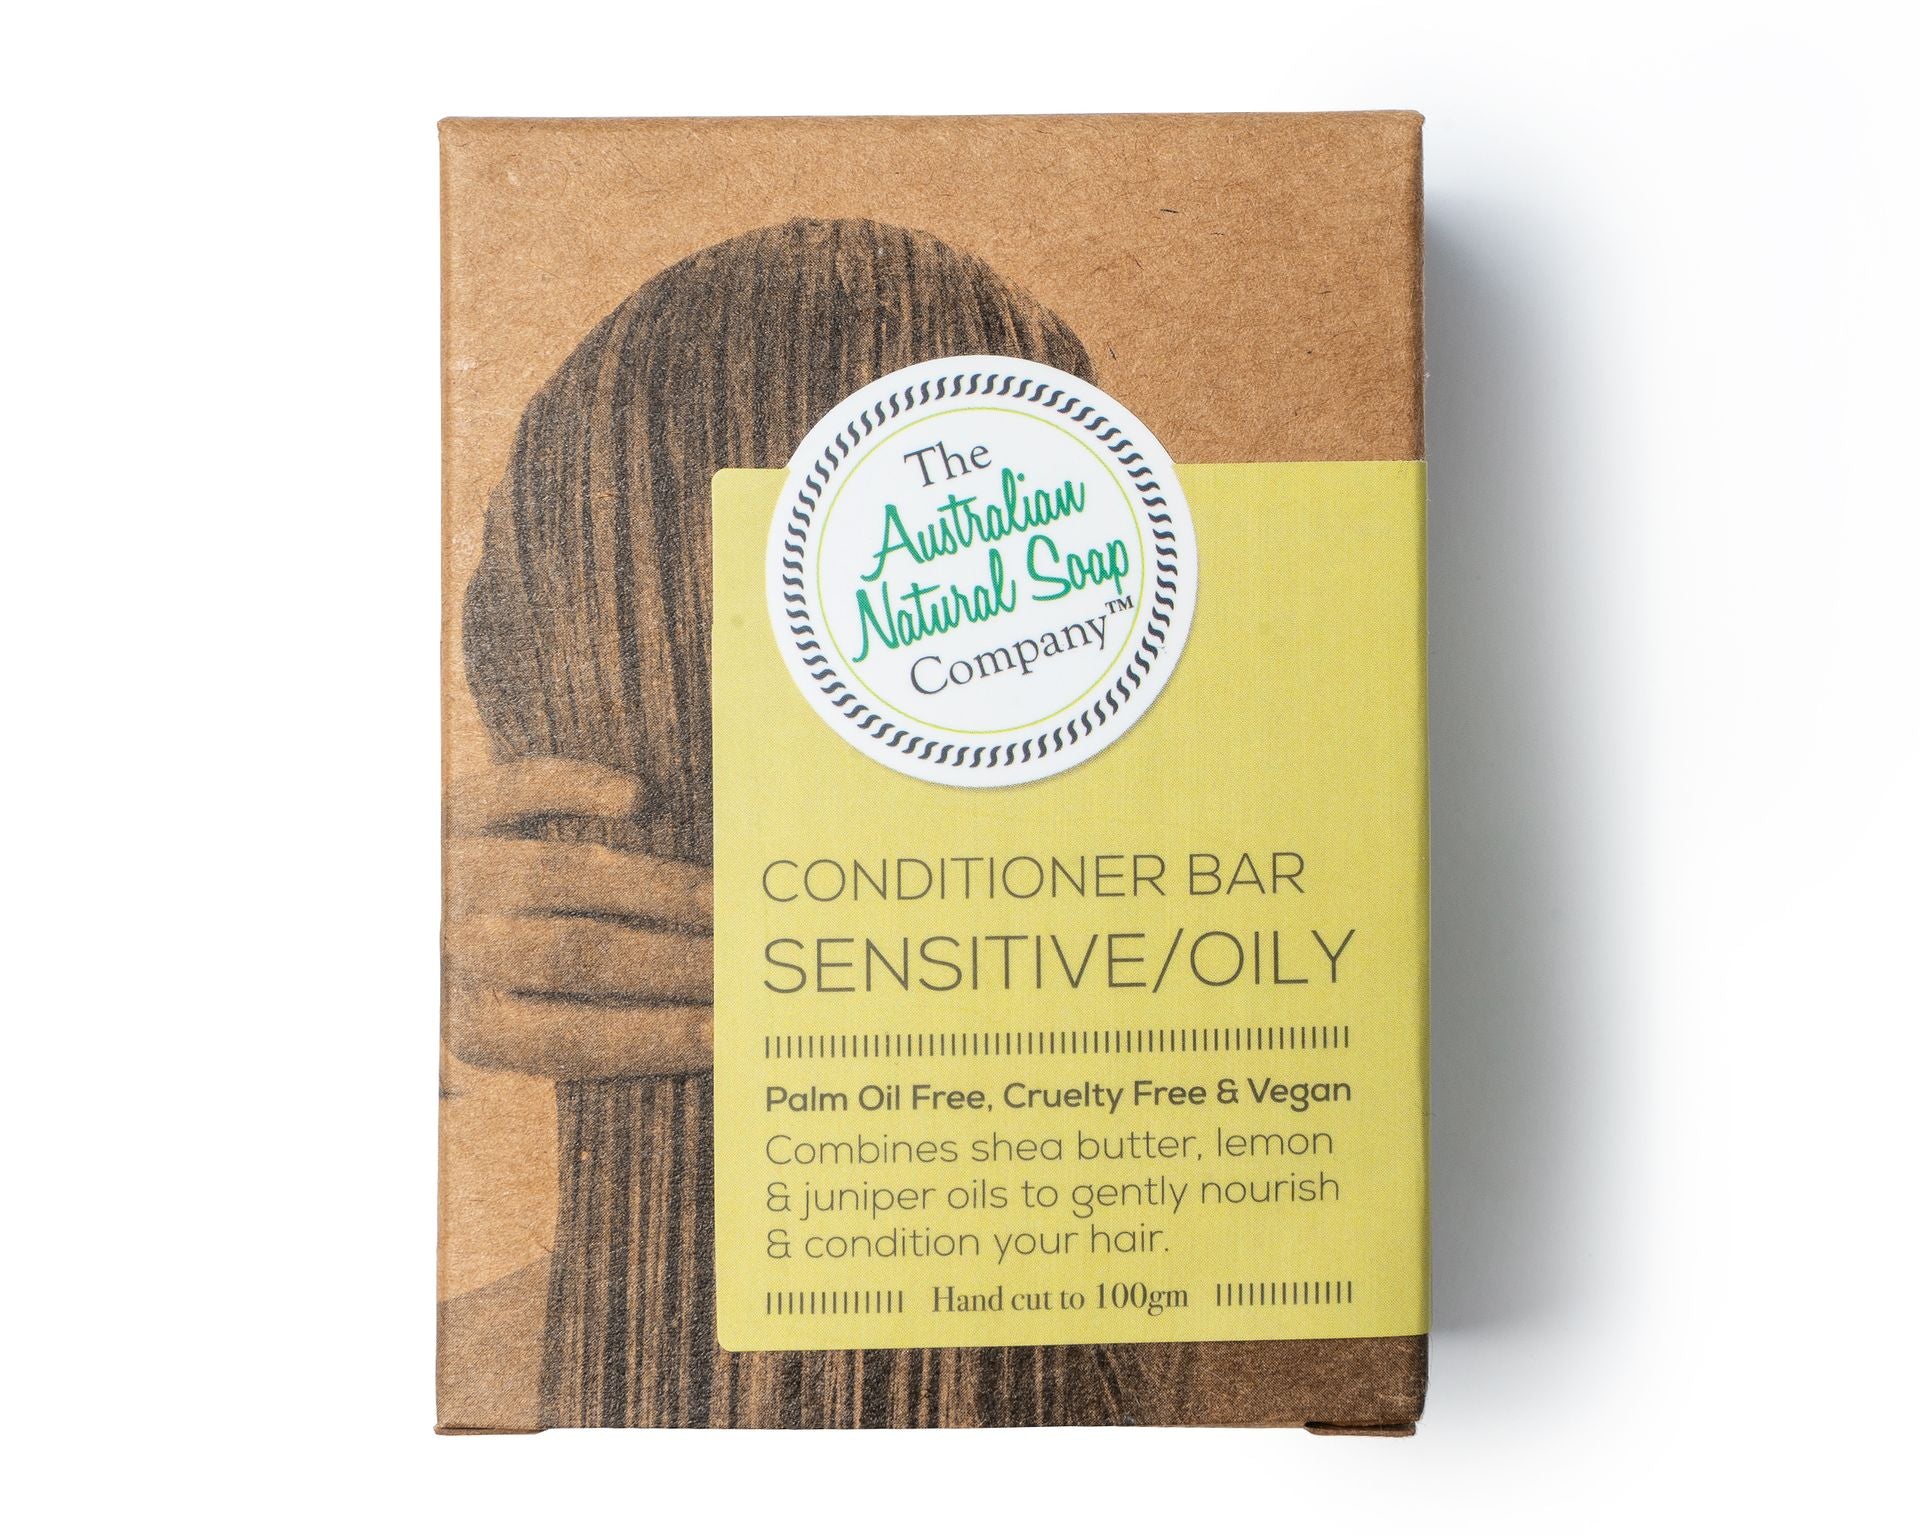 Australian Natural Soap Company hair conditioner bar for sensitive oily hair front of box